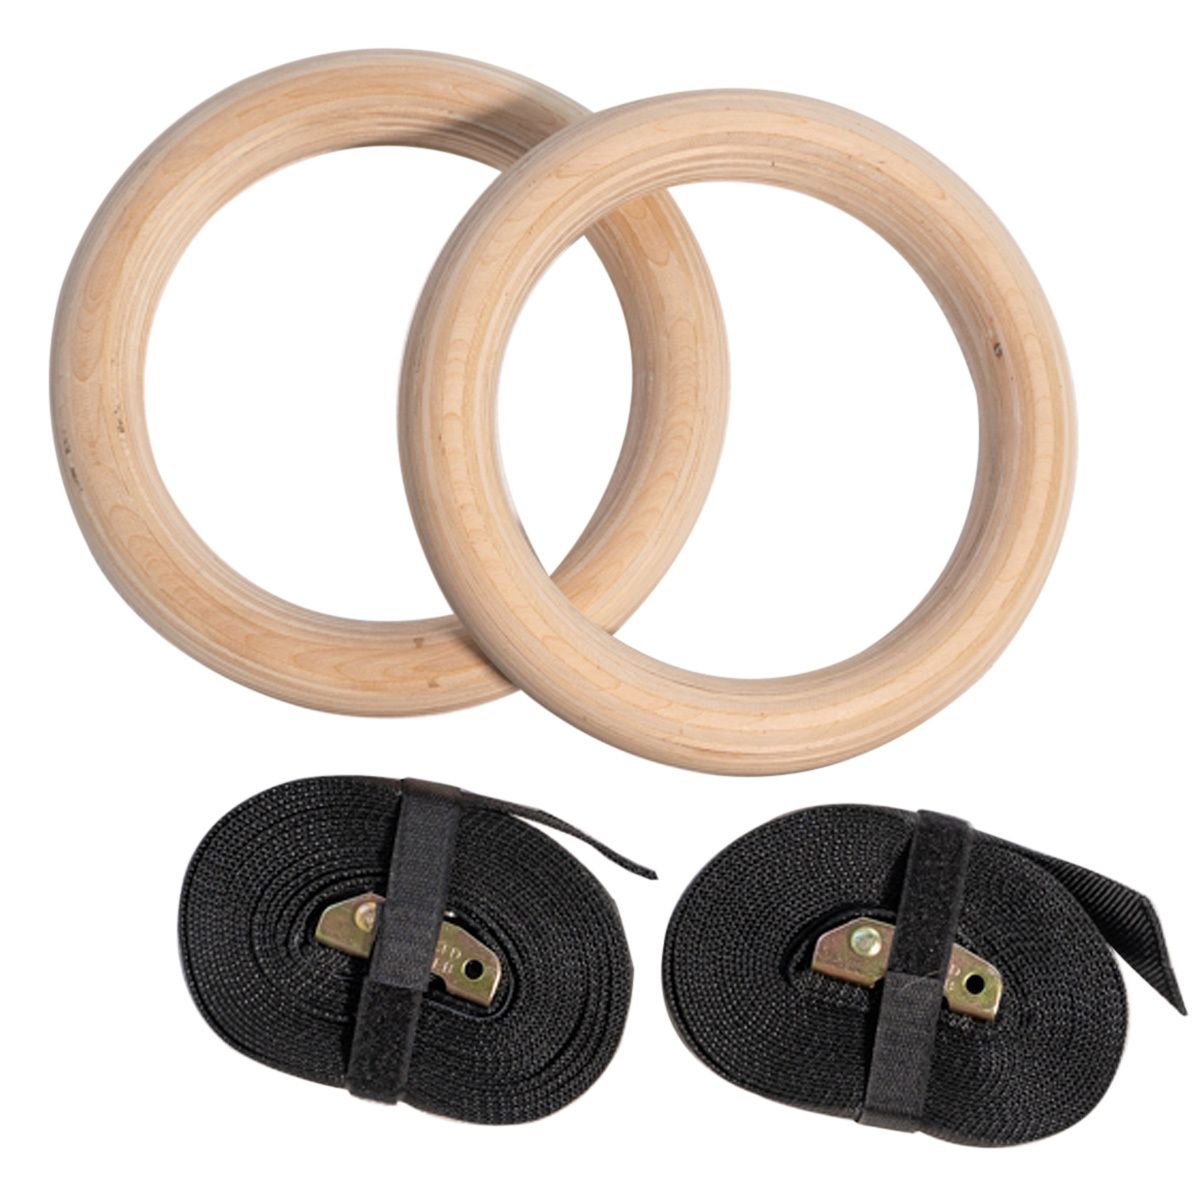 Wooden Gymnastic Rings With Belts